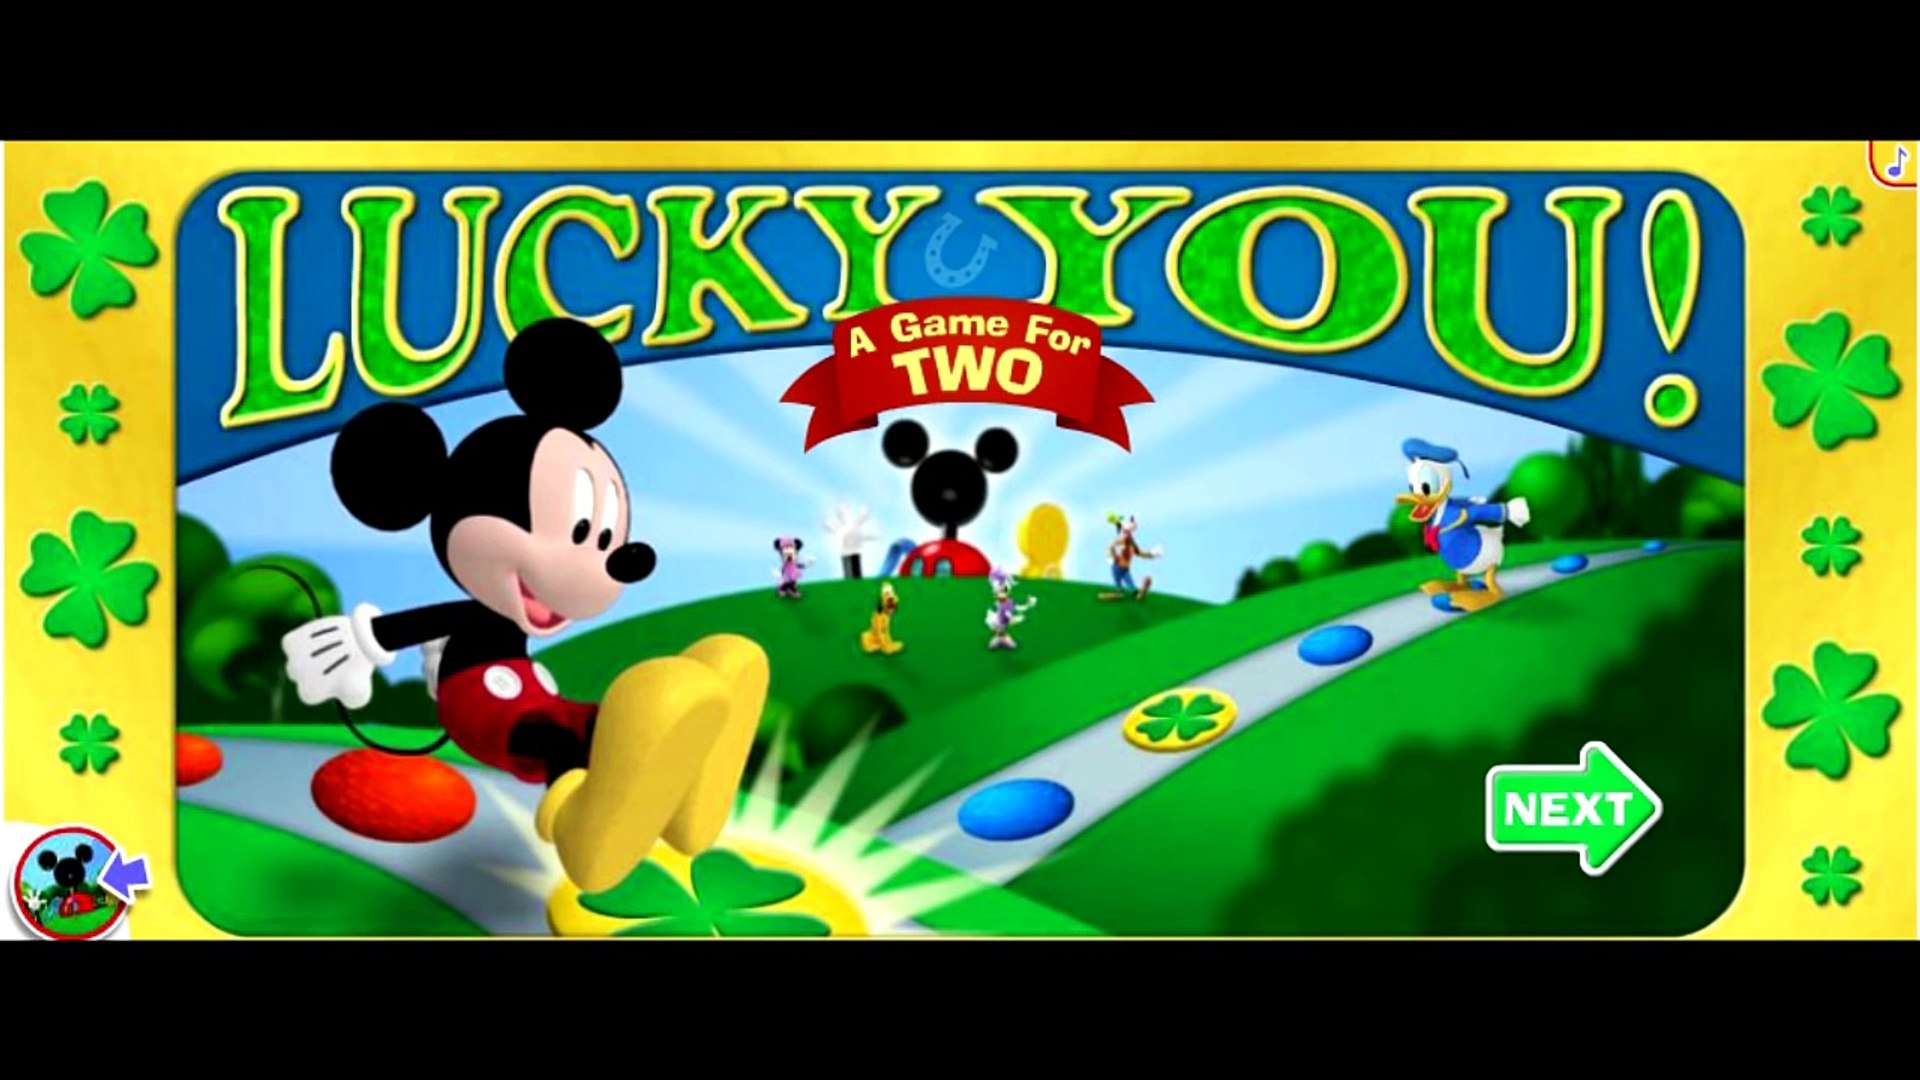 Mickey Mousekersize Moves - Mickey Mouse Clubhouse Game - Disney